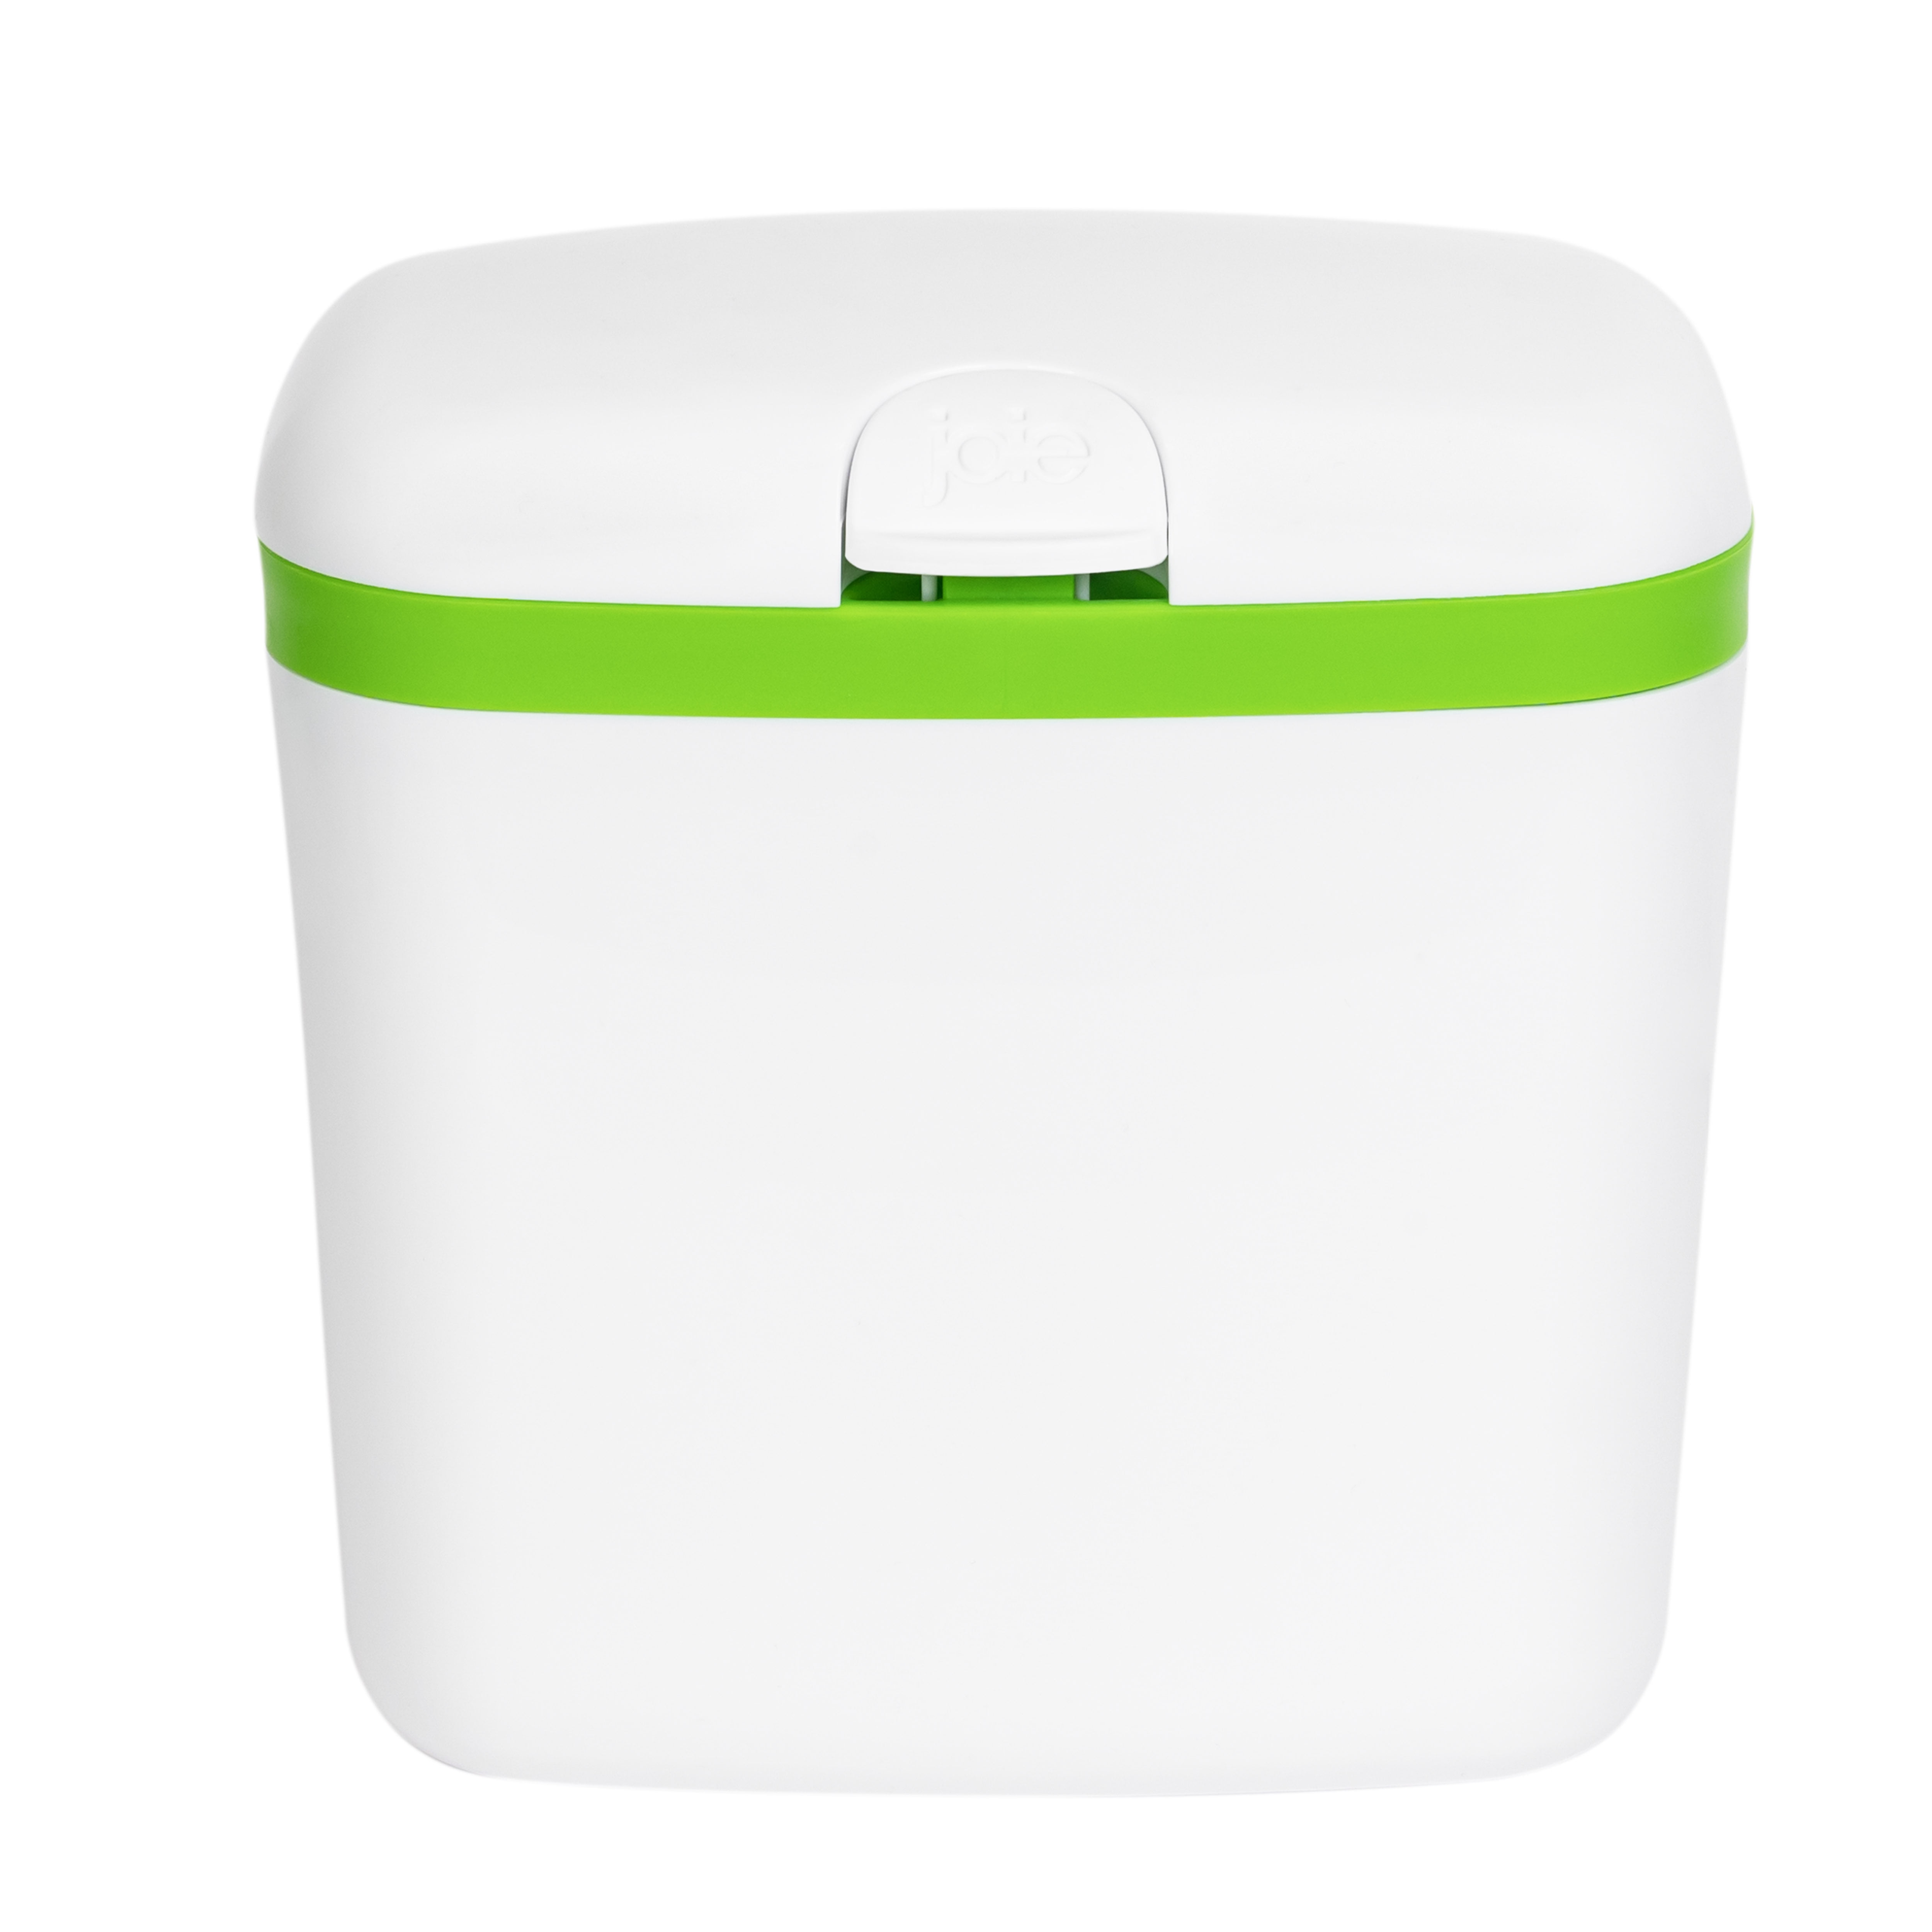 iDOO Electric Kitchen Waste Composter, Automatic Smart Compost Bin with  Carbon Filter, Odor-Free, 3L Capacity, White